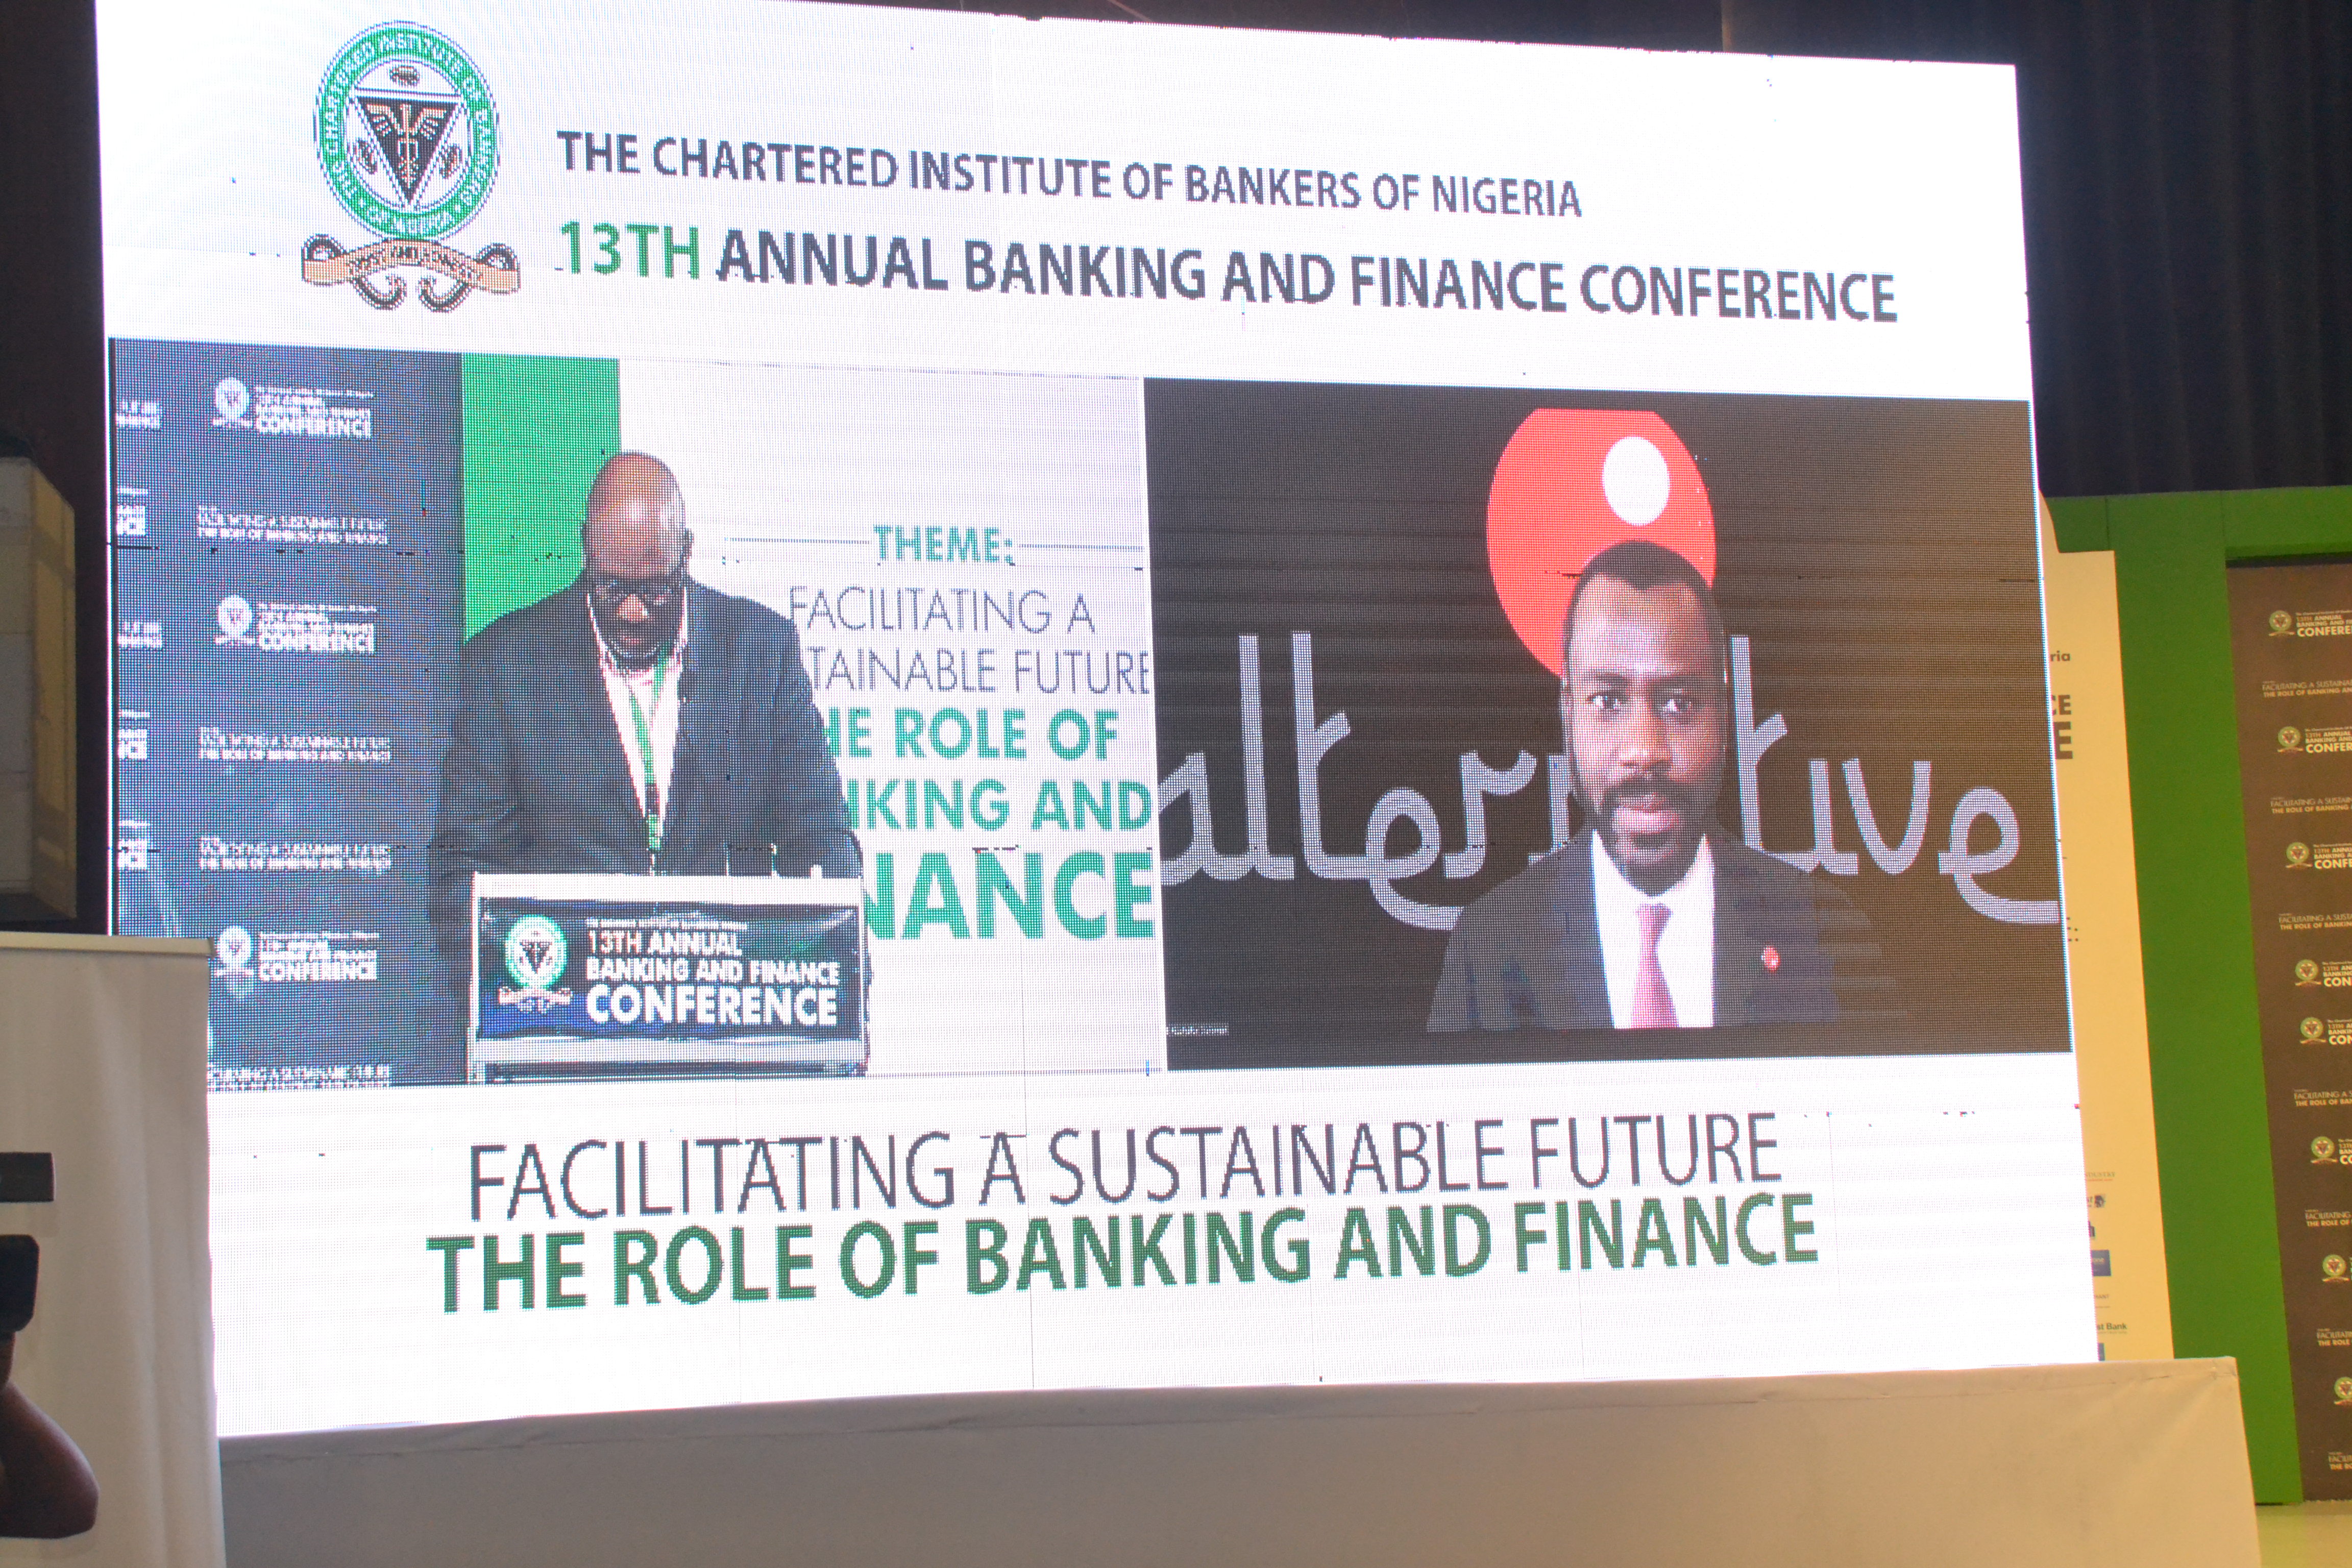 13th Annual Banking and Finance Conference